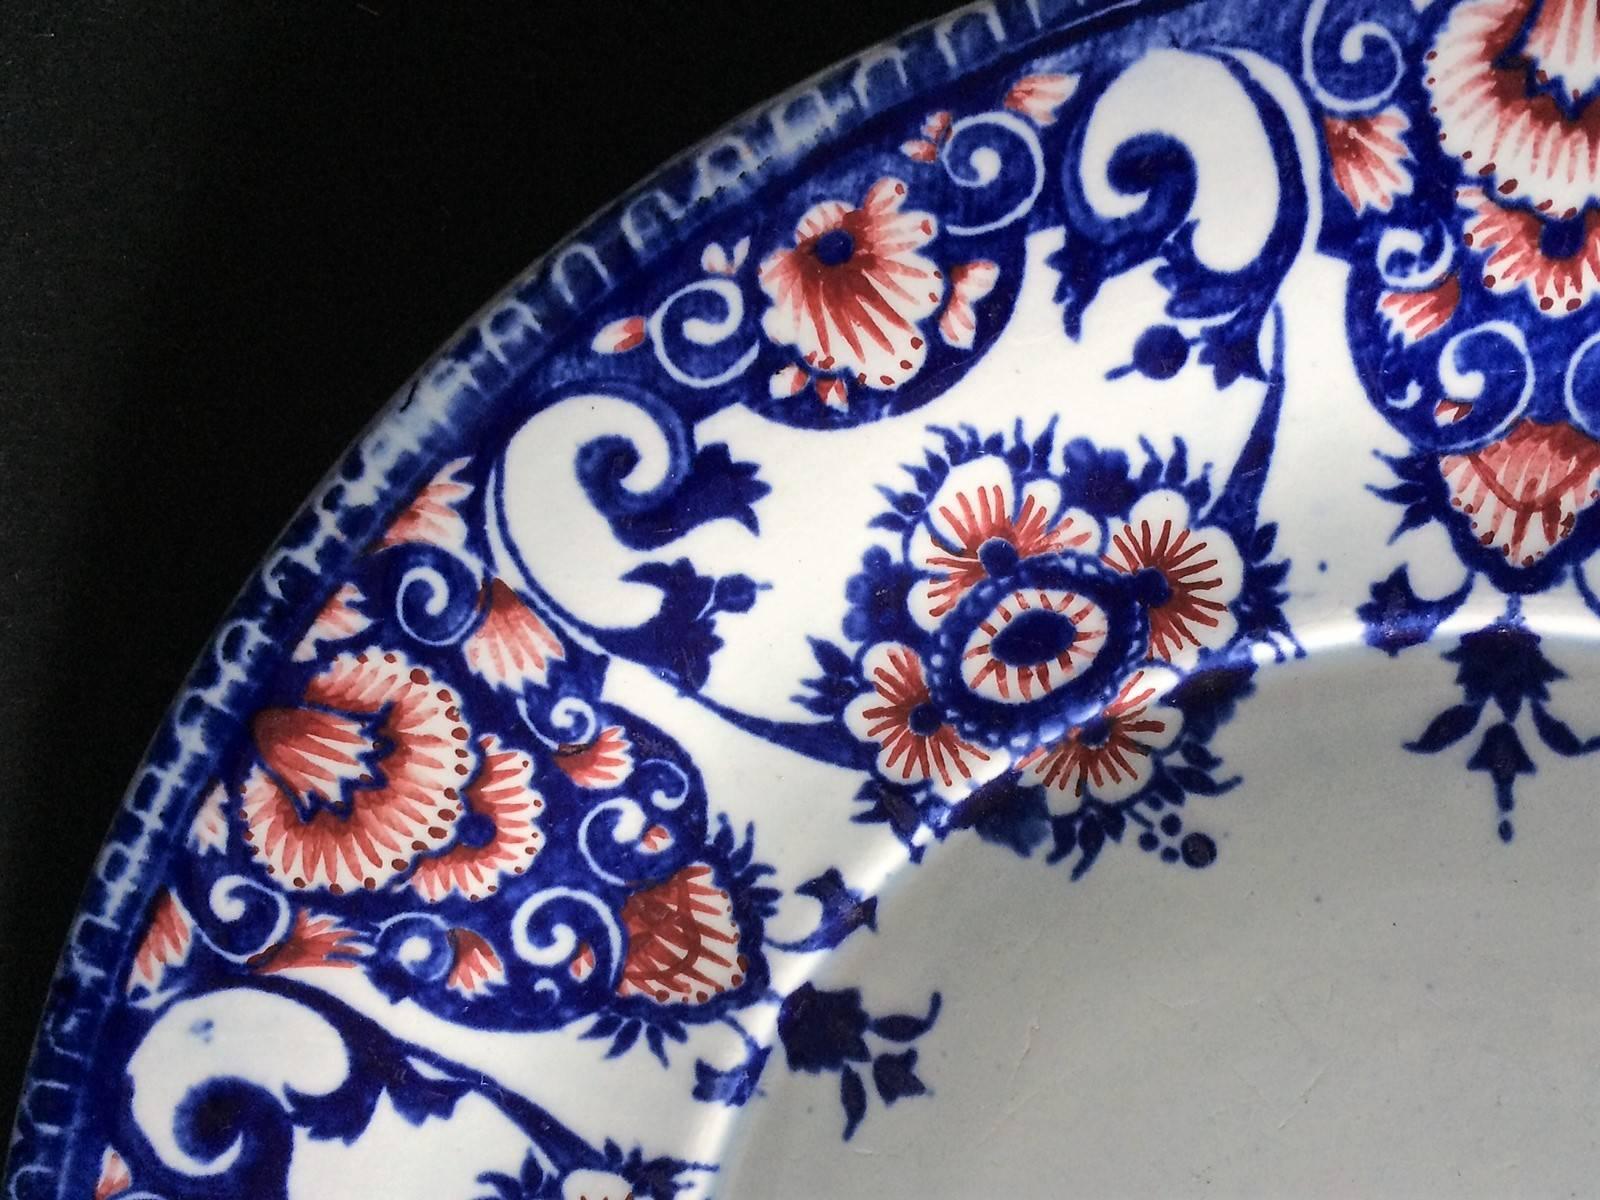 Gien earthenware decorative plate decorated with blue and red stylized floral motifs on a white background.
Stamp of the manufacture of Gien on the back of the plate.